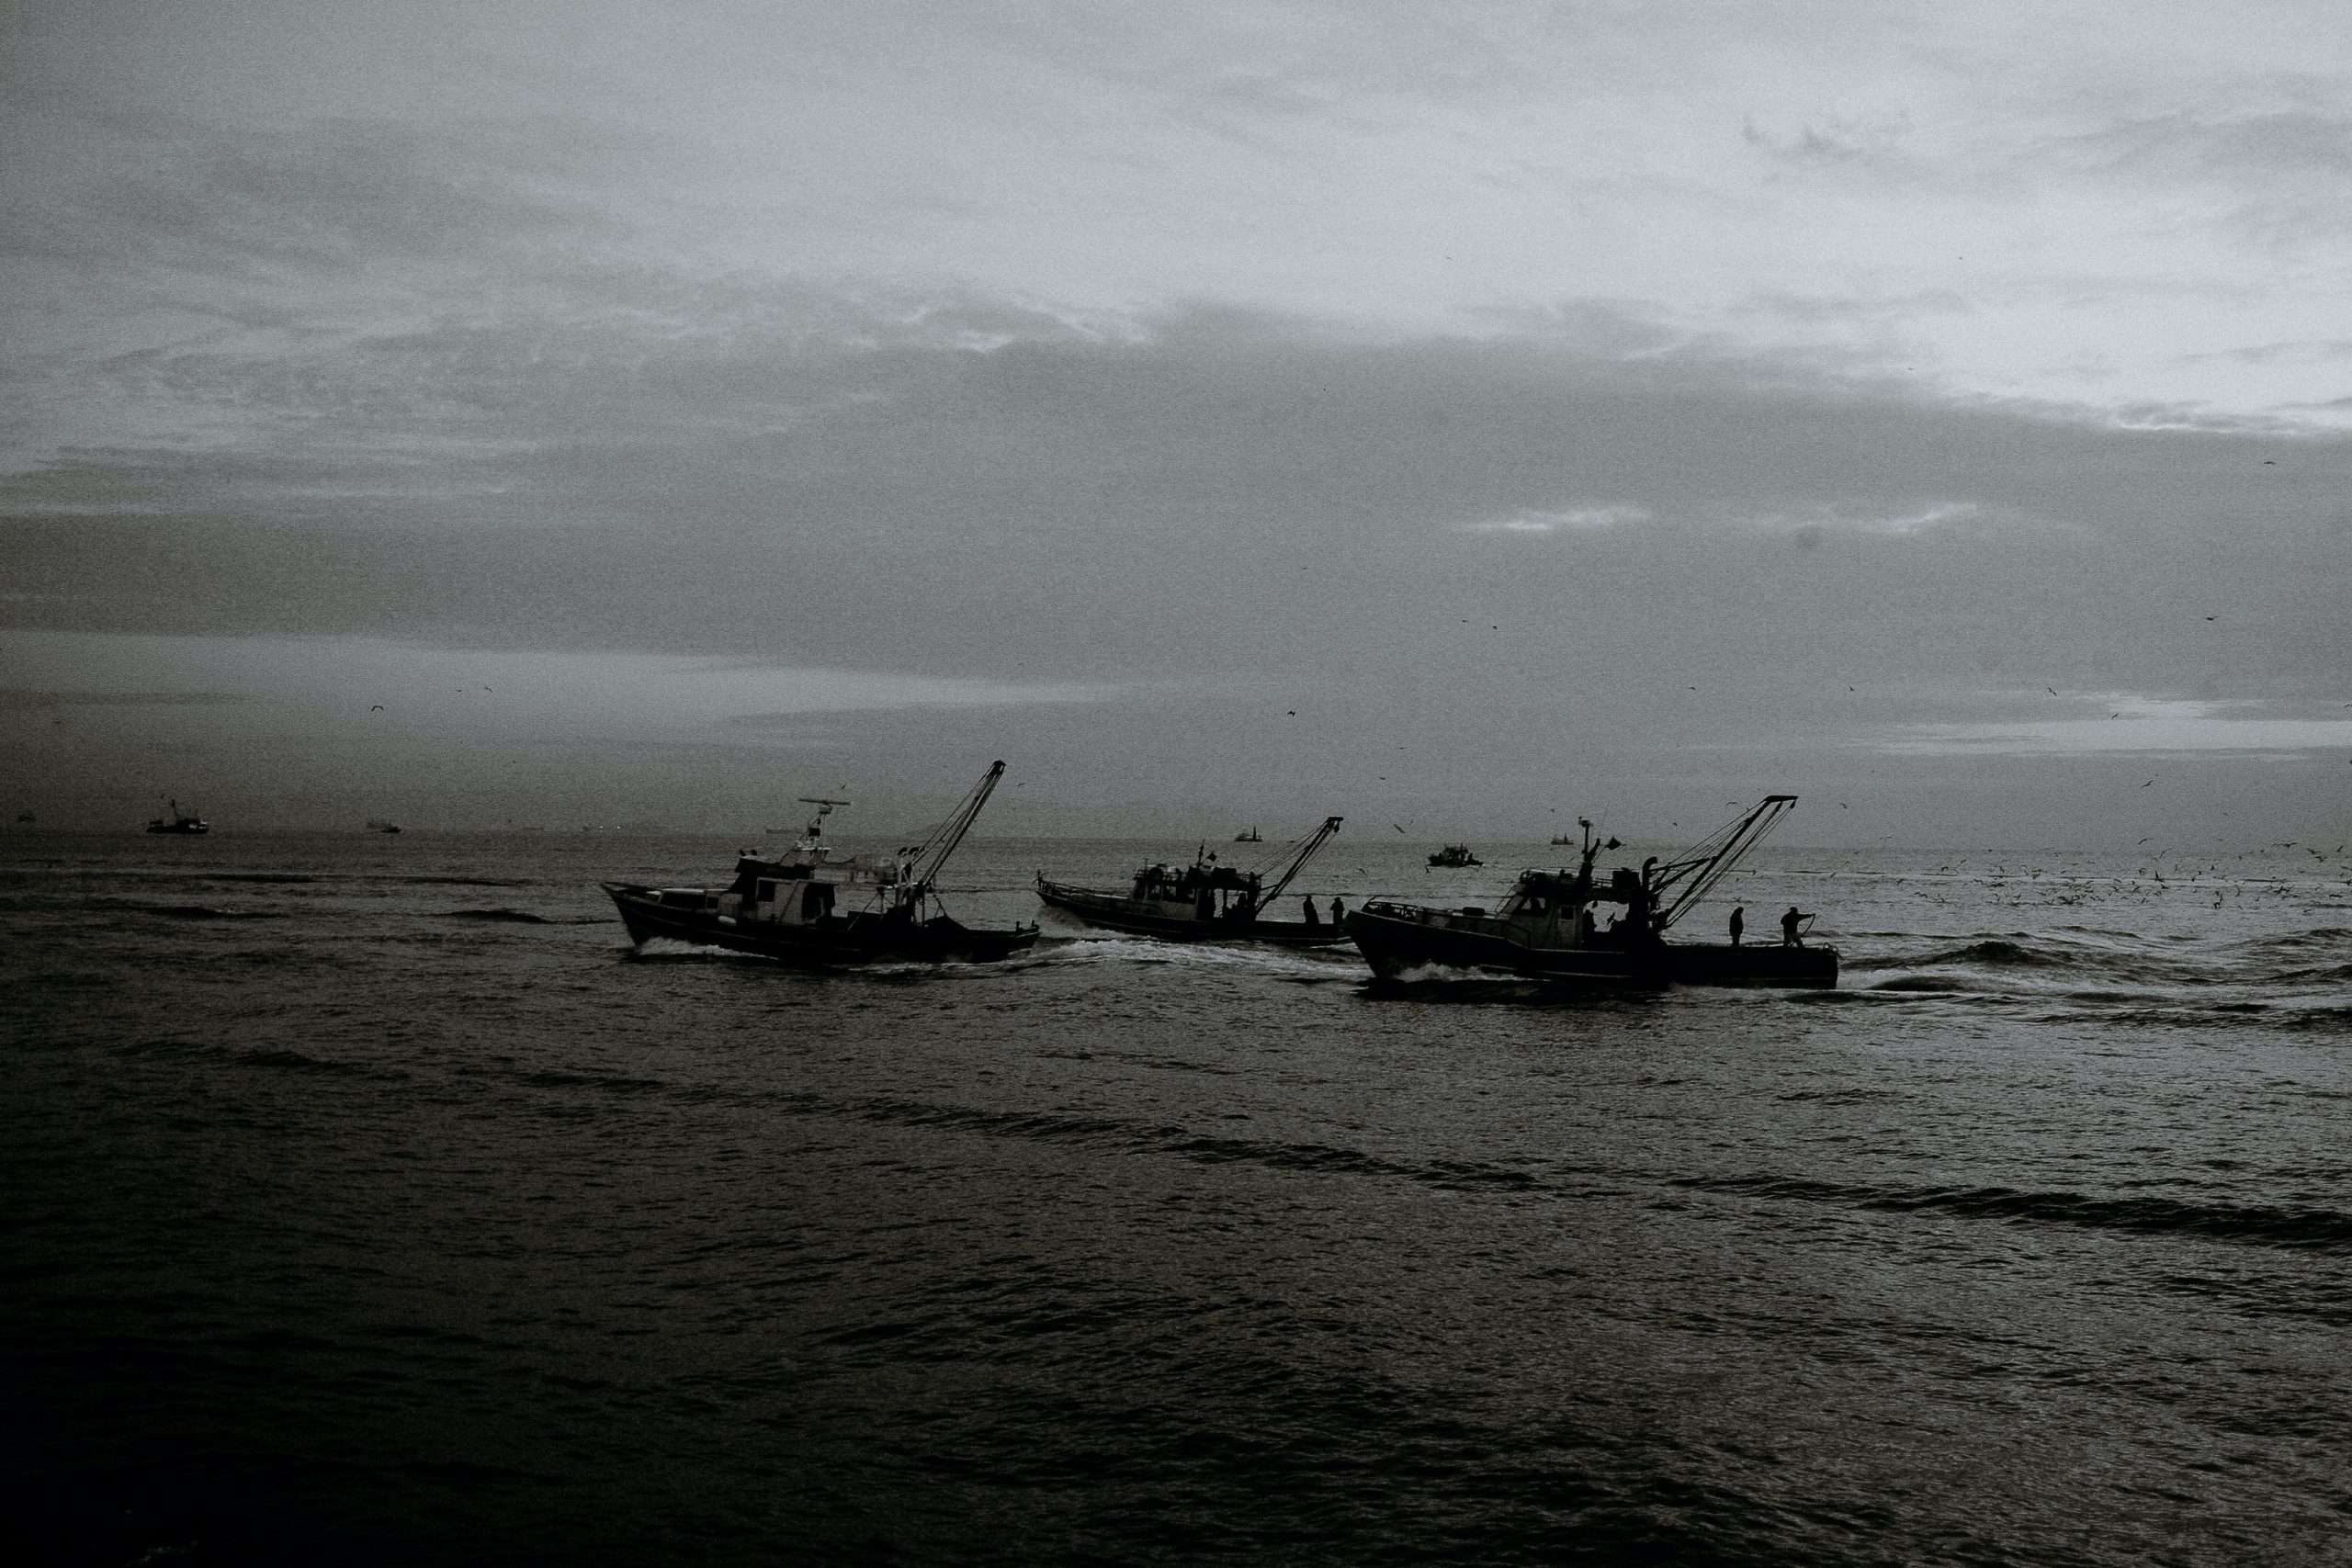 Trawling is frankly not a sustainable practice when it comes to how we source seafood.